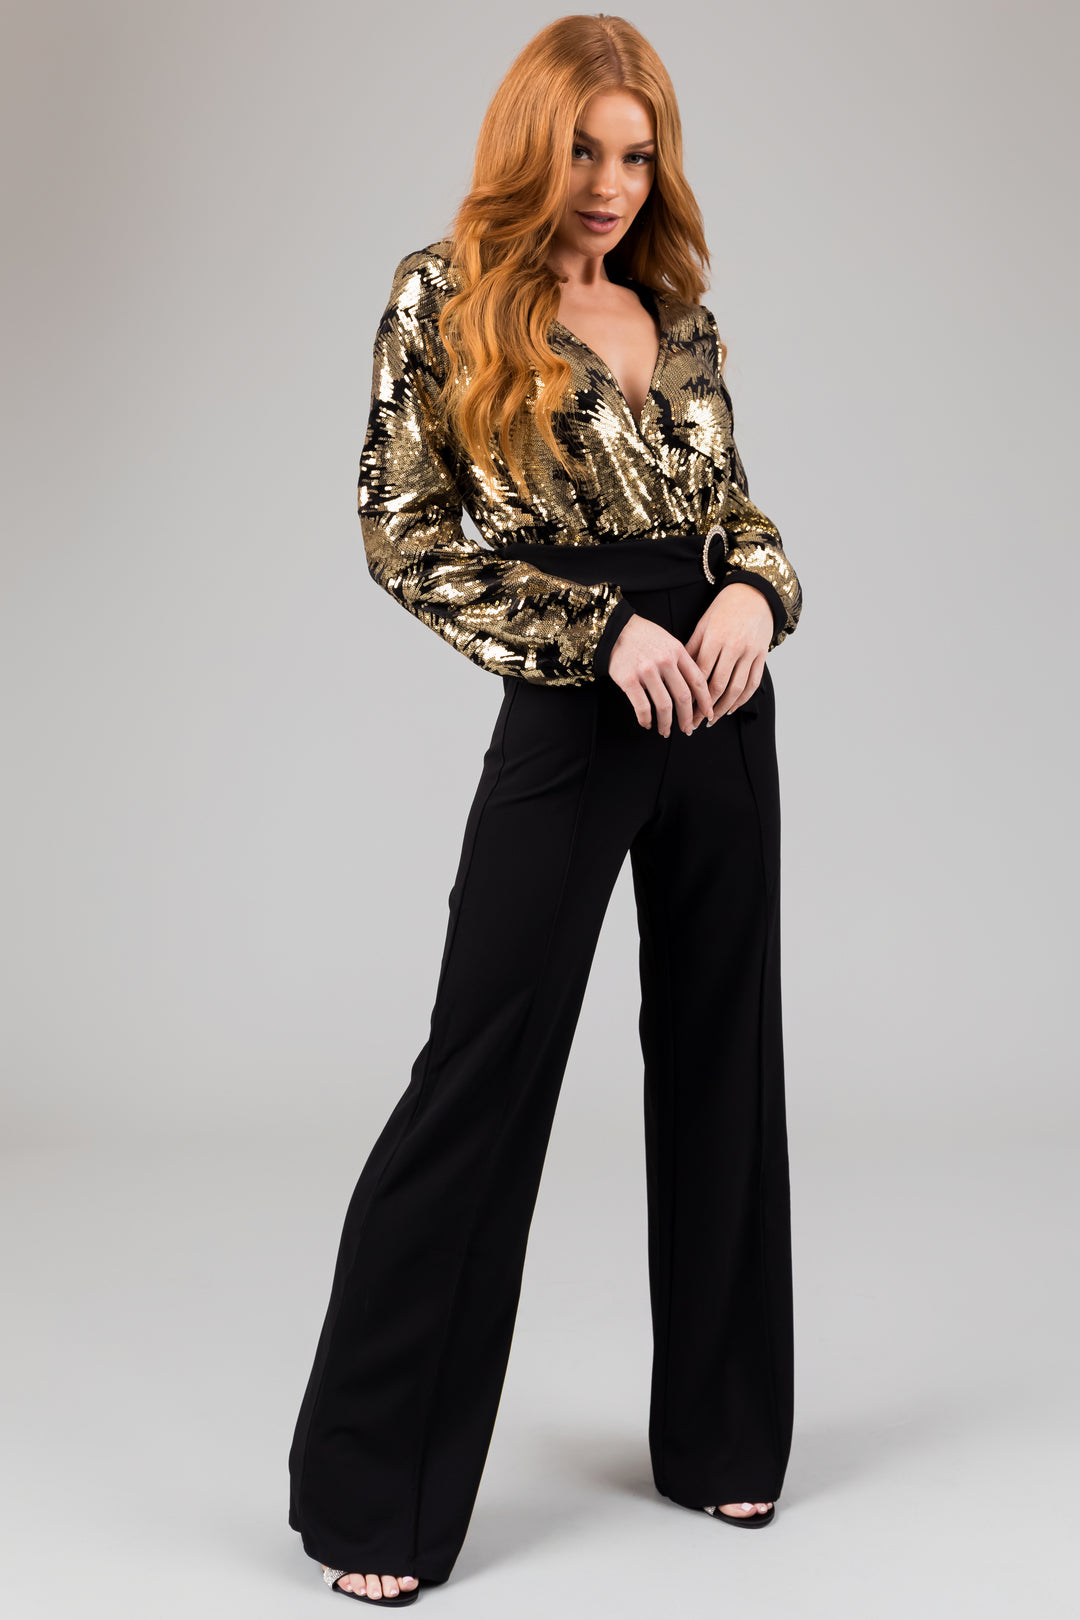 Style Pantry, Plunging Neck Bodysuit + Sequin High Waist Pants - gold and  black sequin stripe pants